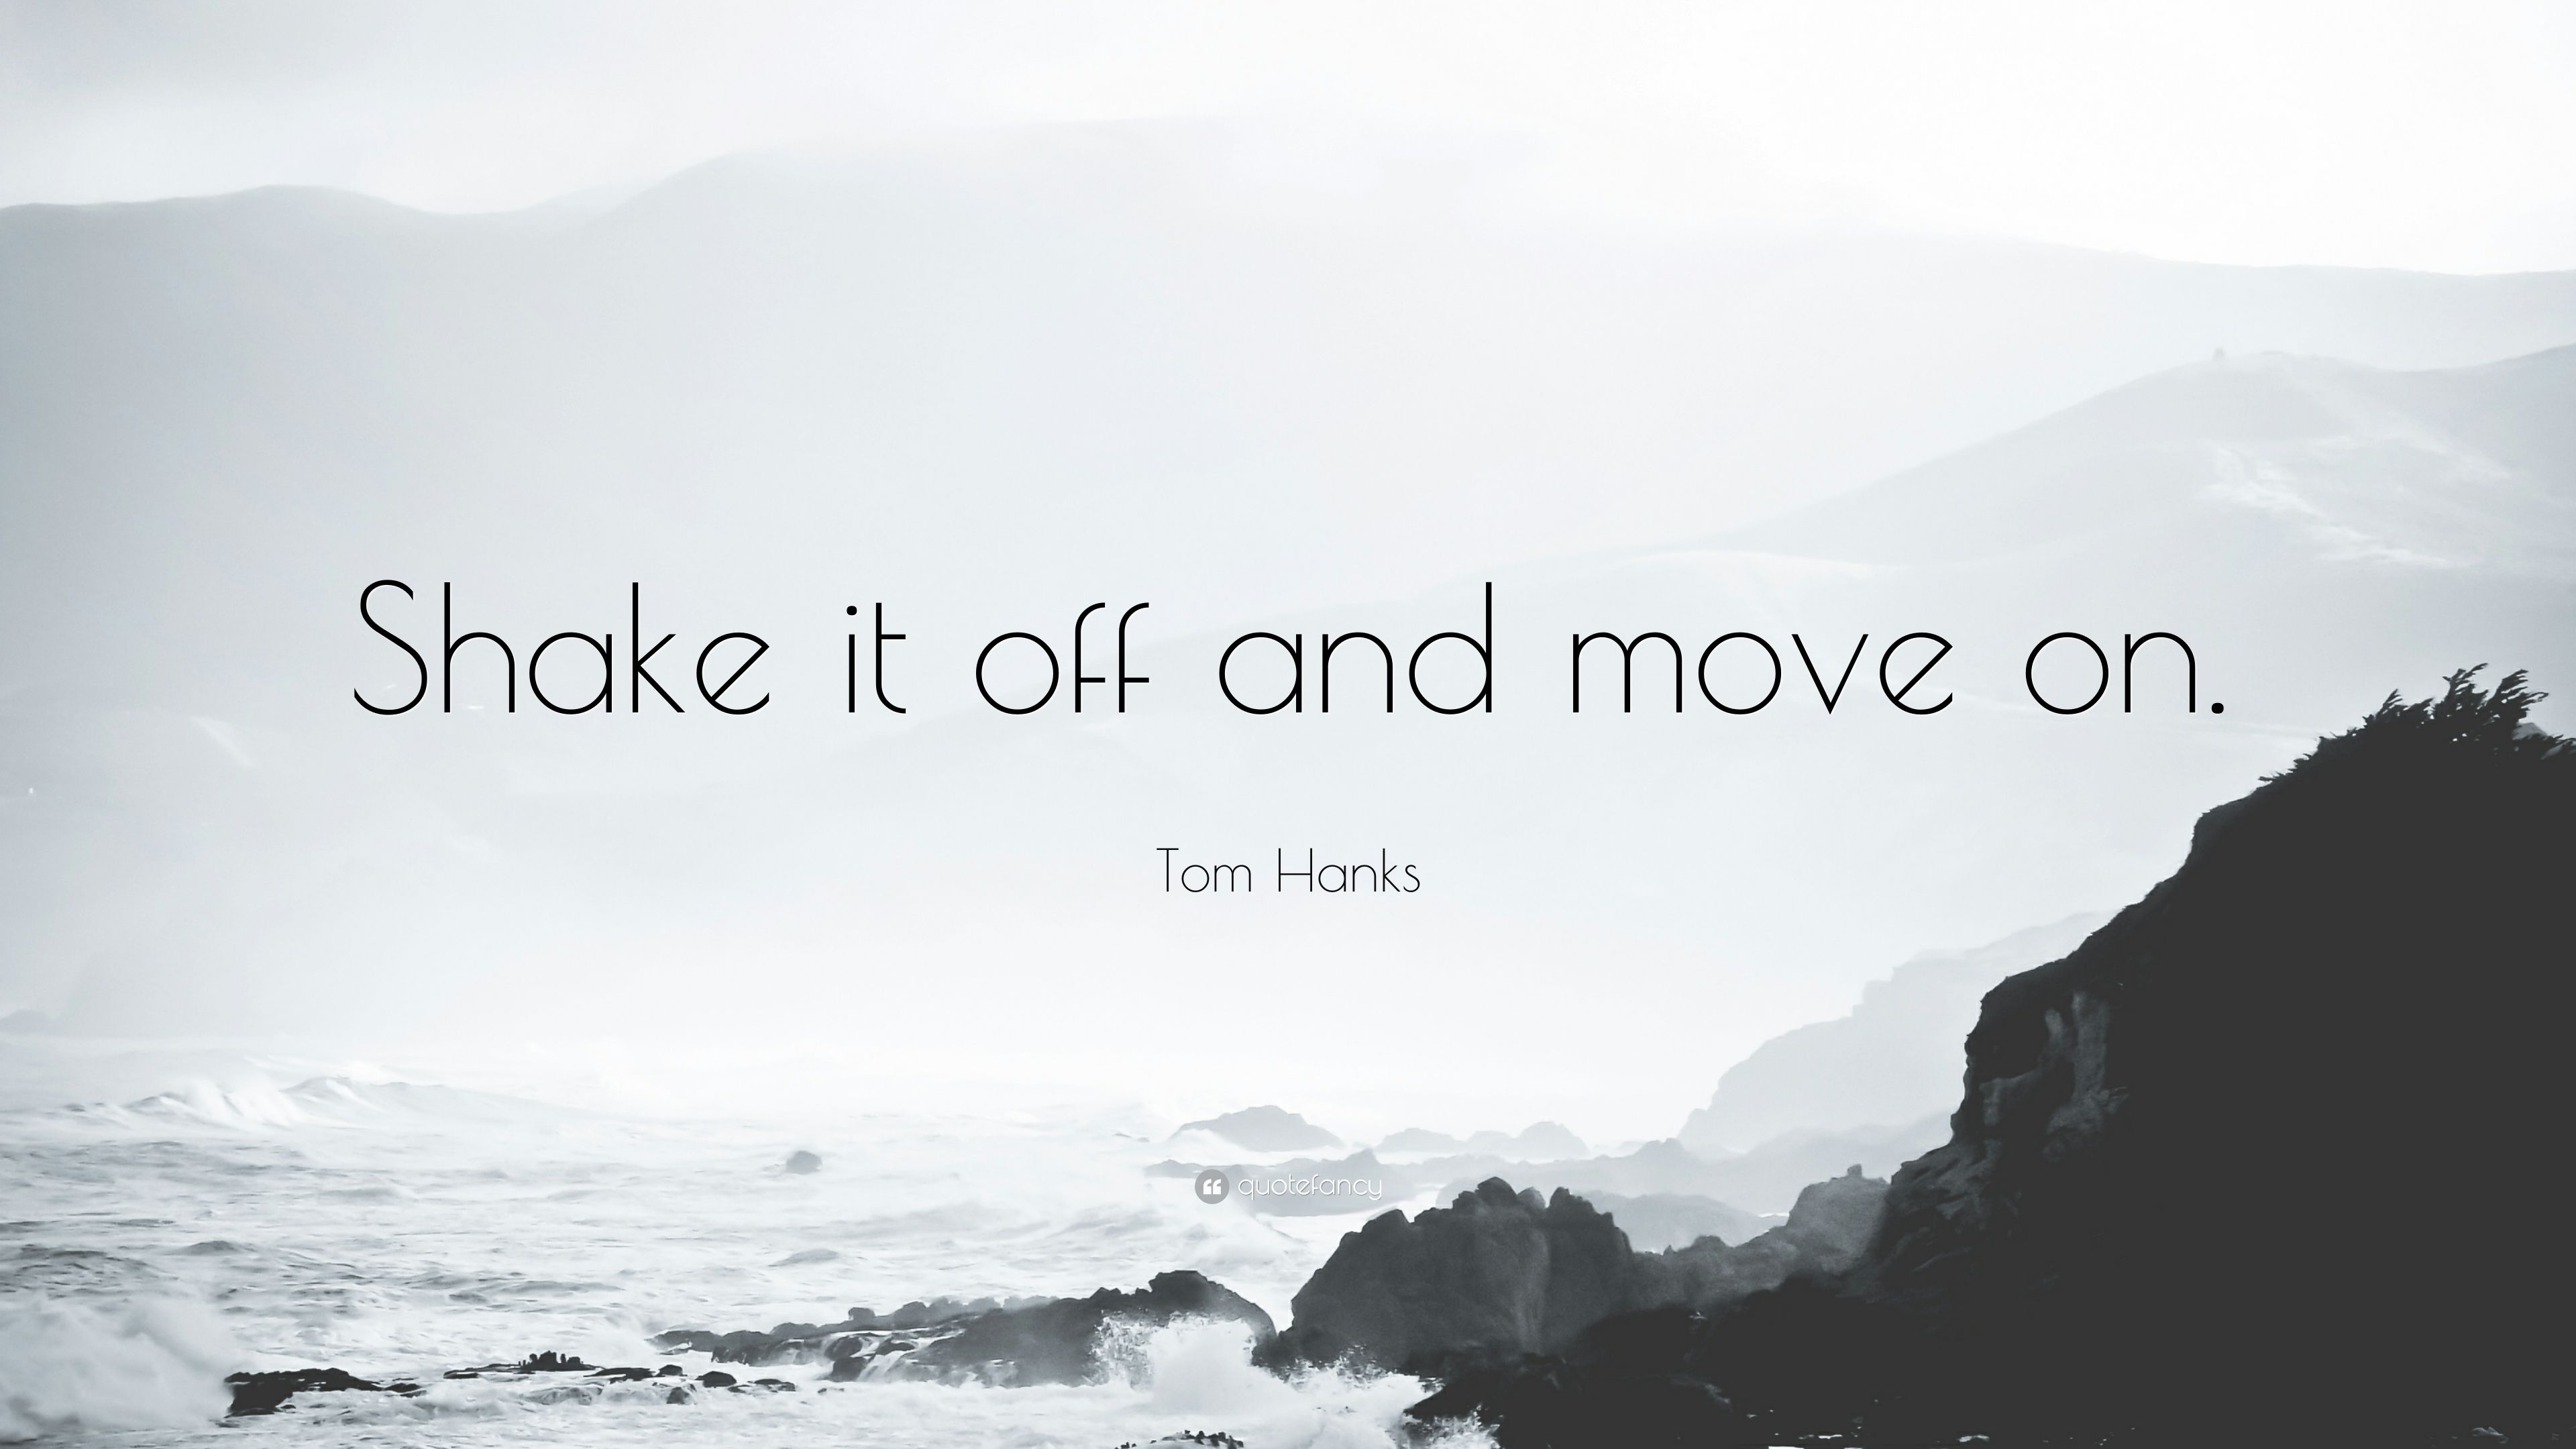 Tom Hanks Quote: “Shake it off and move on.” (12 wallpaper)